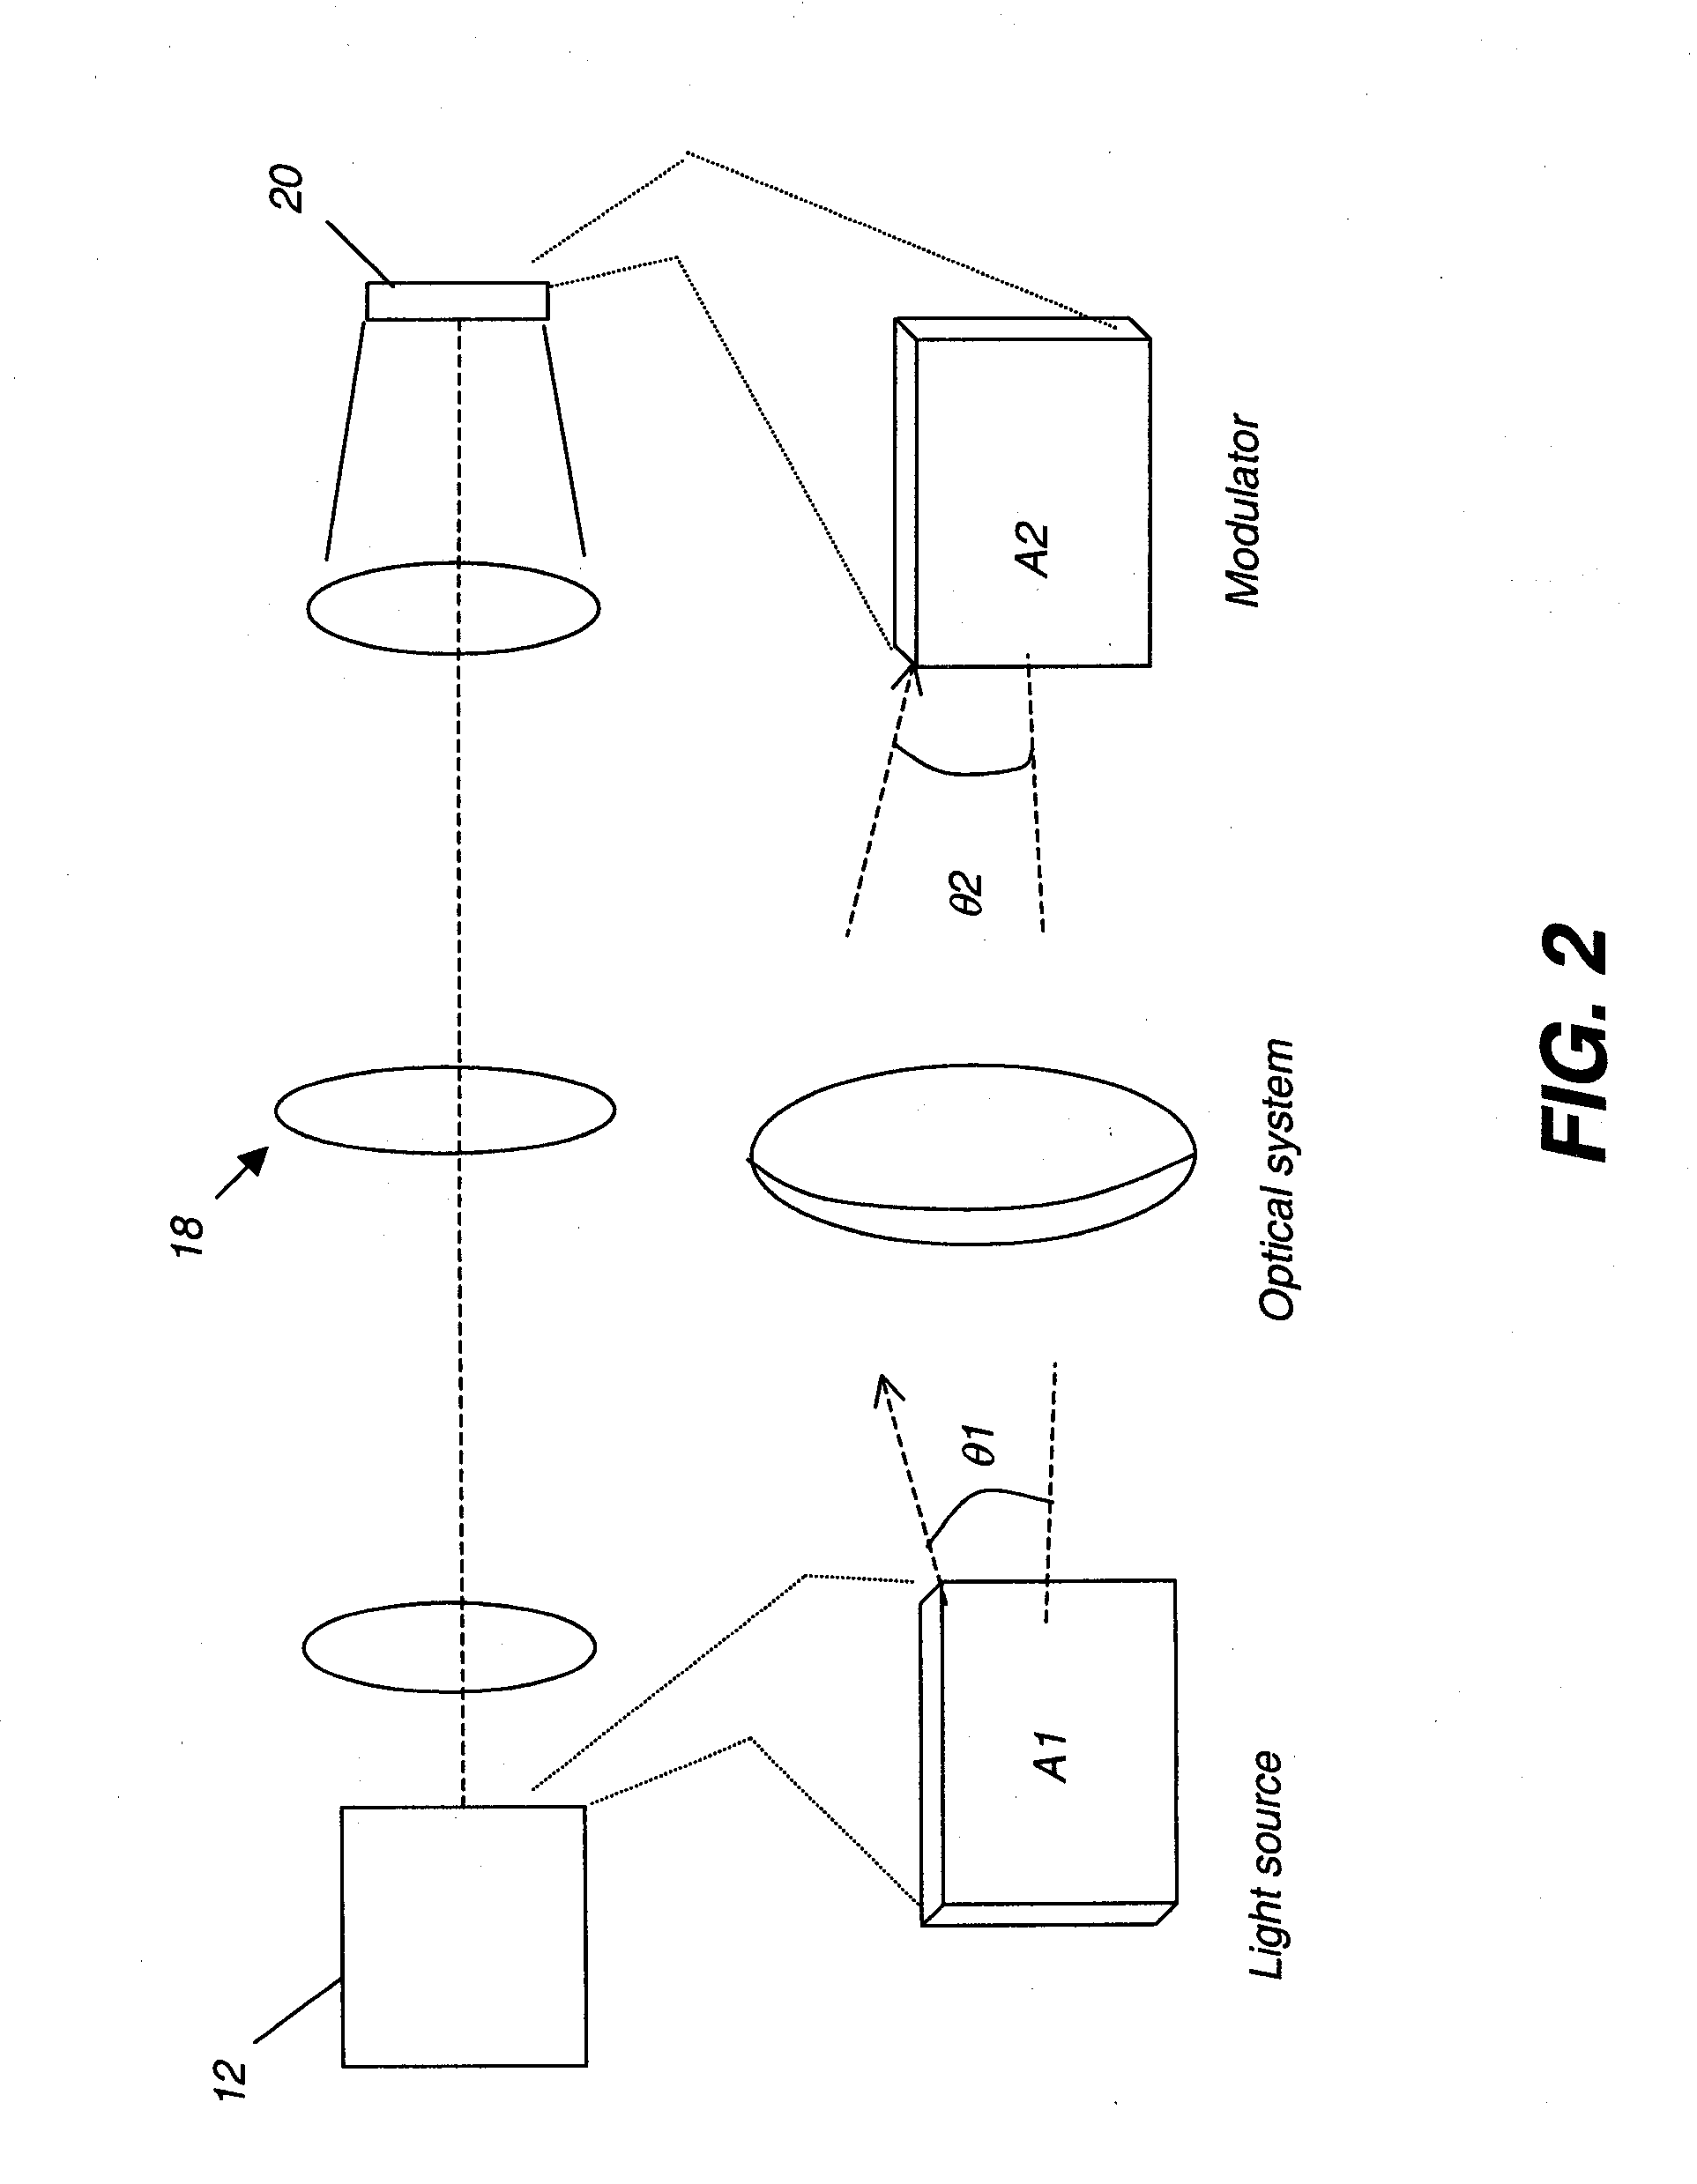 Stereo projection apparatus using polarized solid state light sources